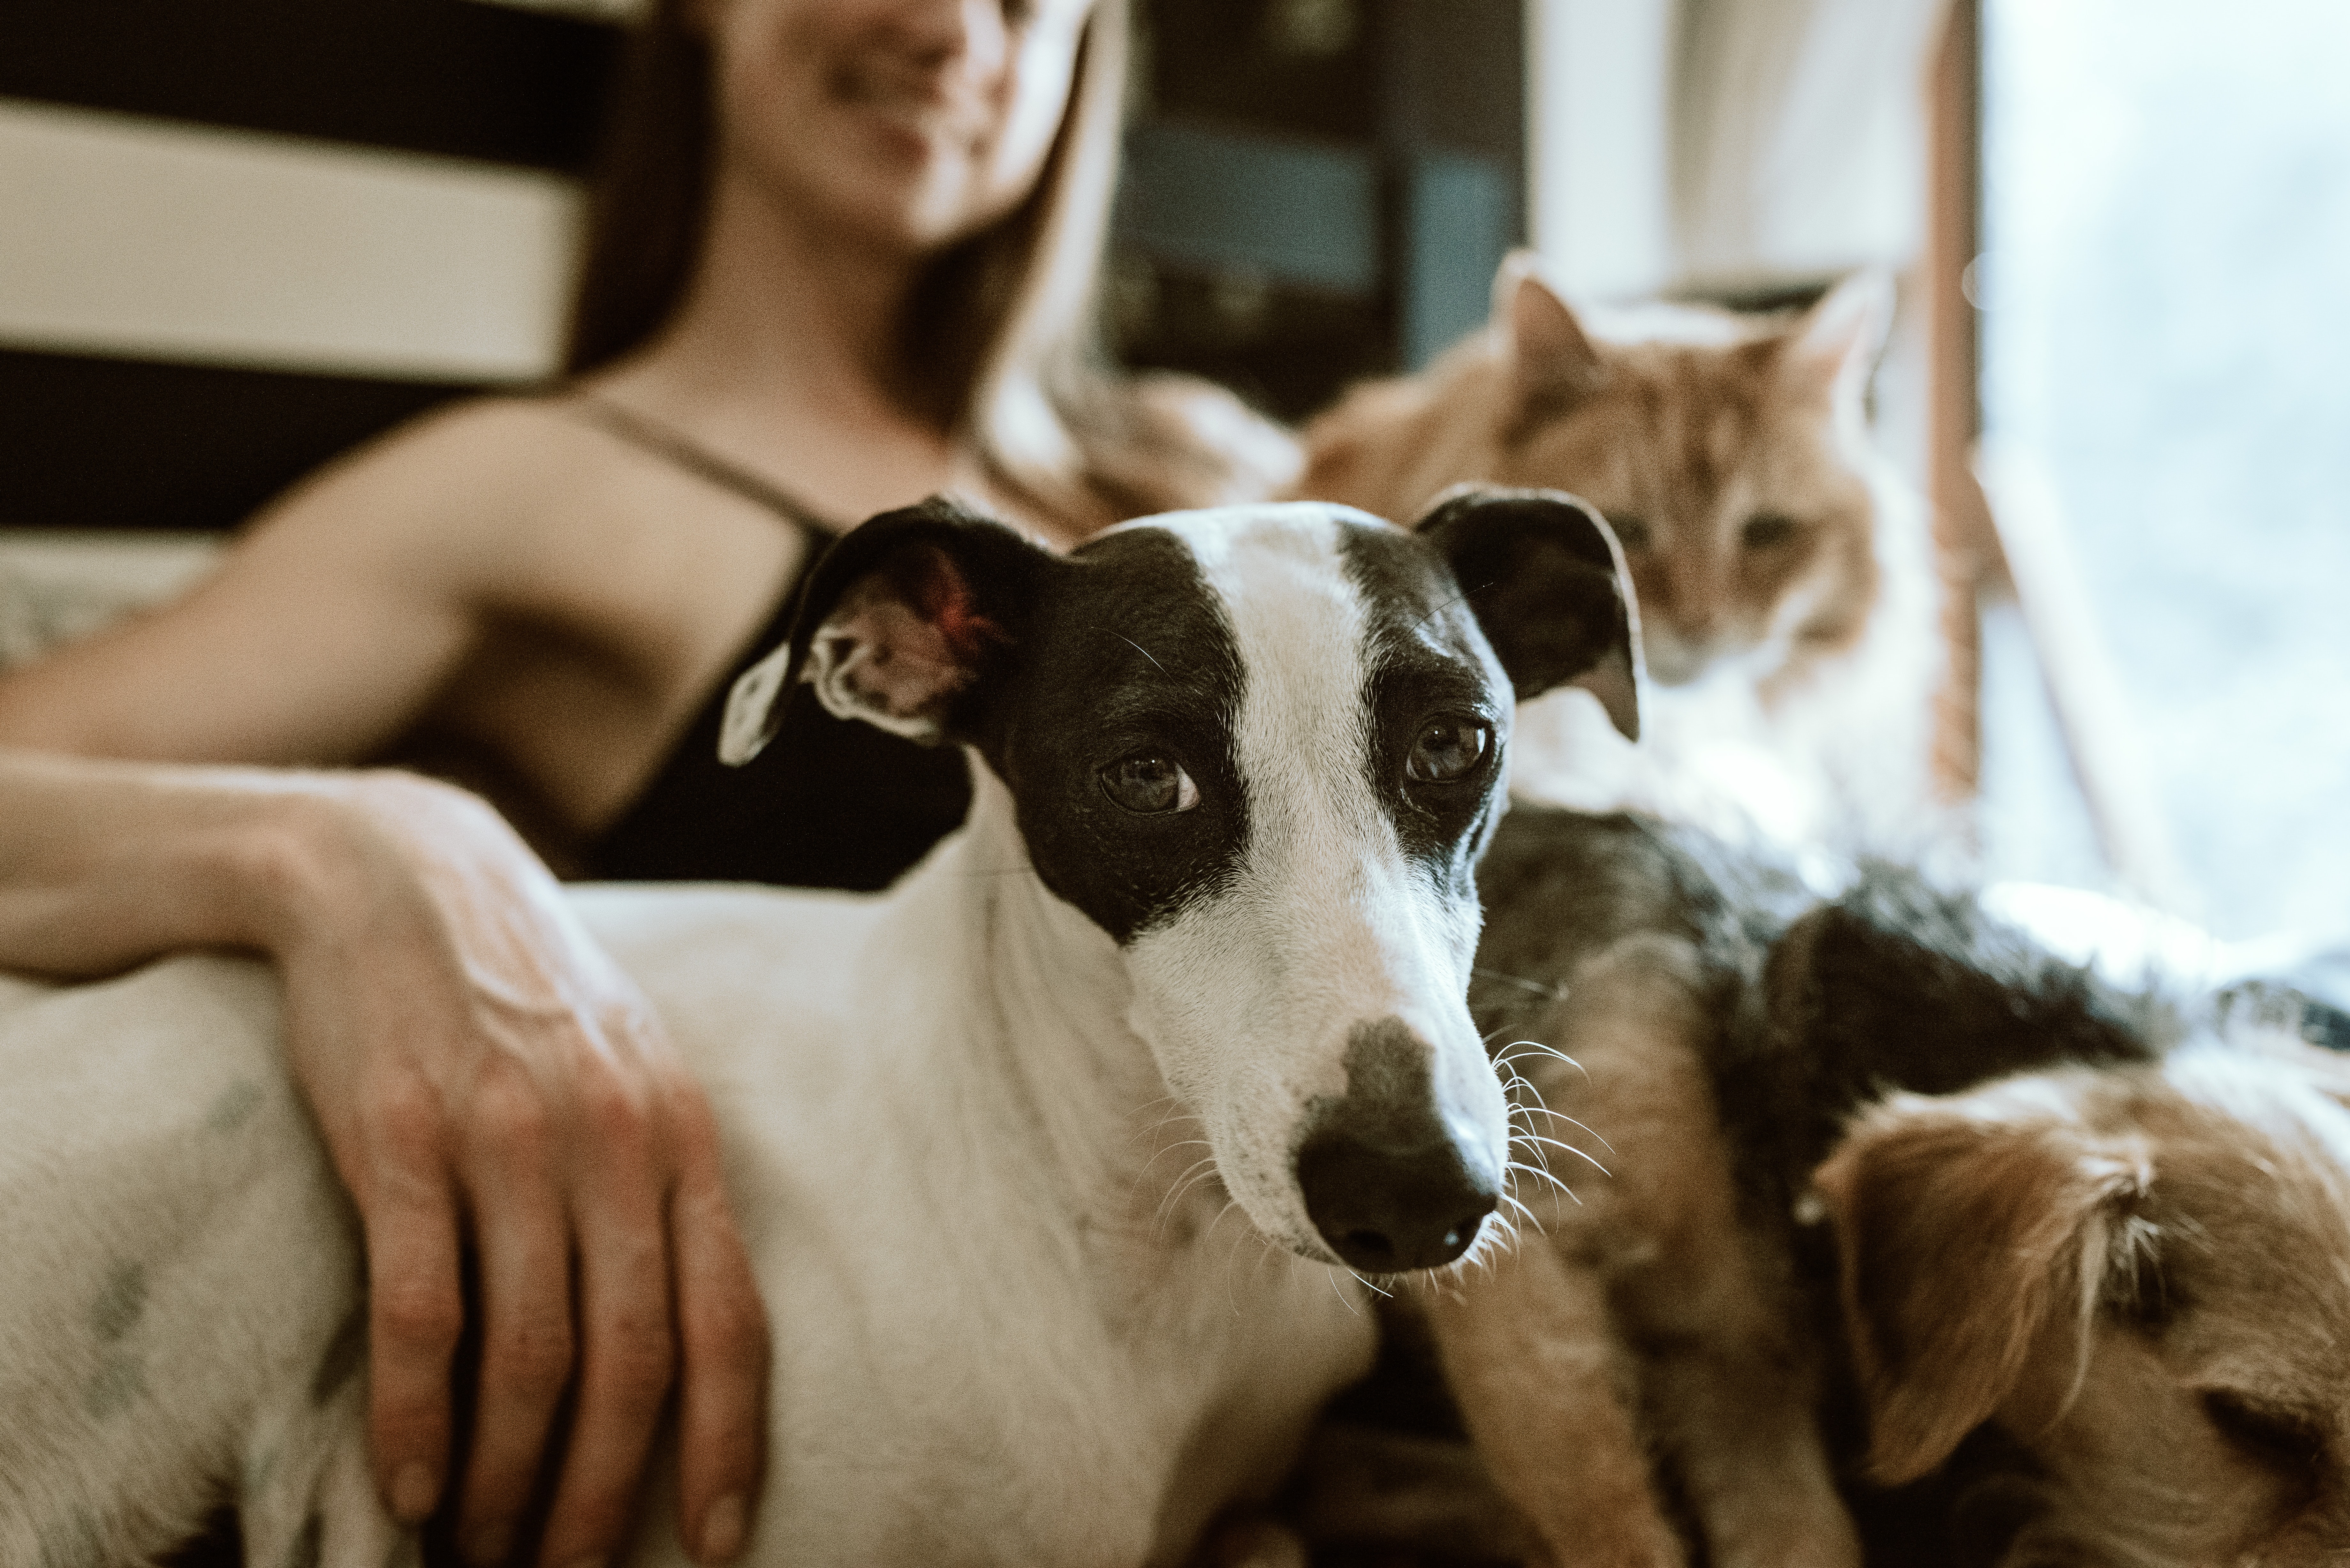 Americans are spending more time with their pets than ever